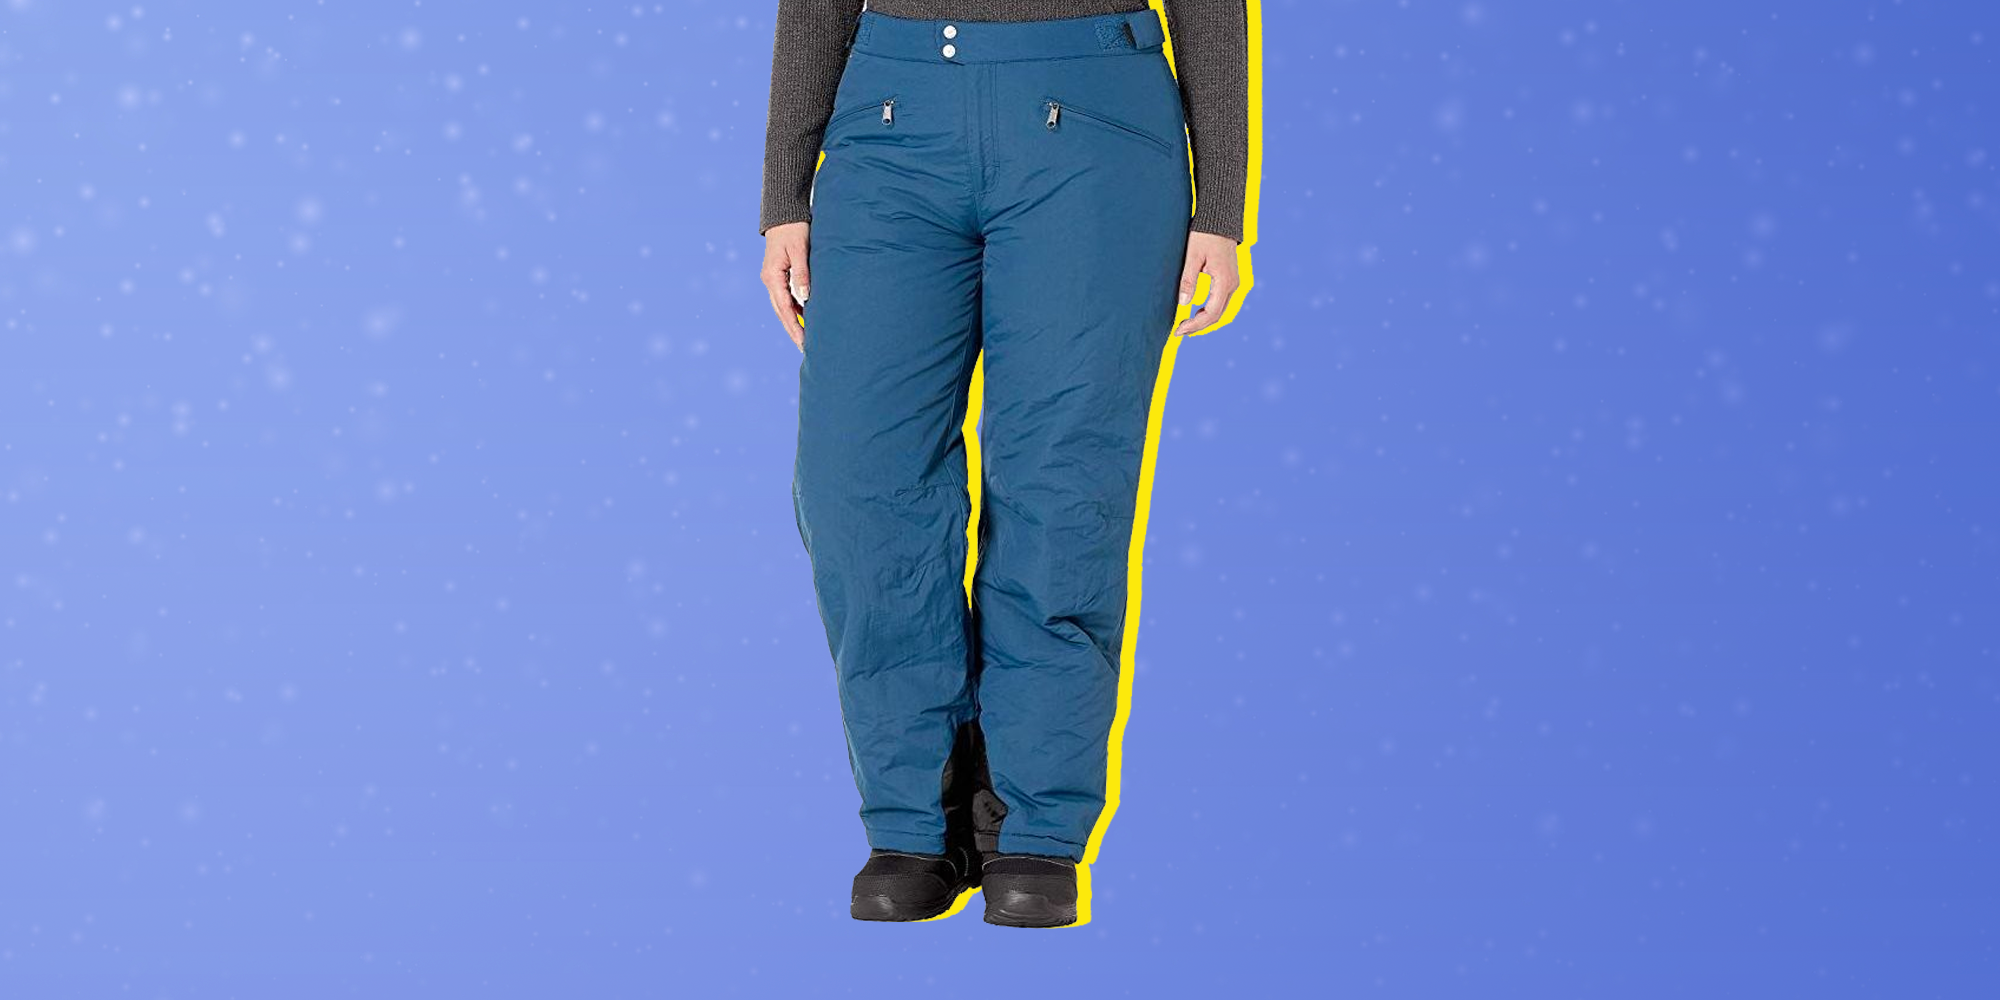 plus size trousers